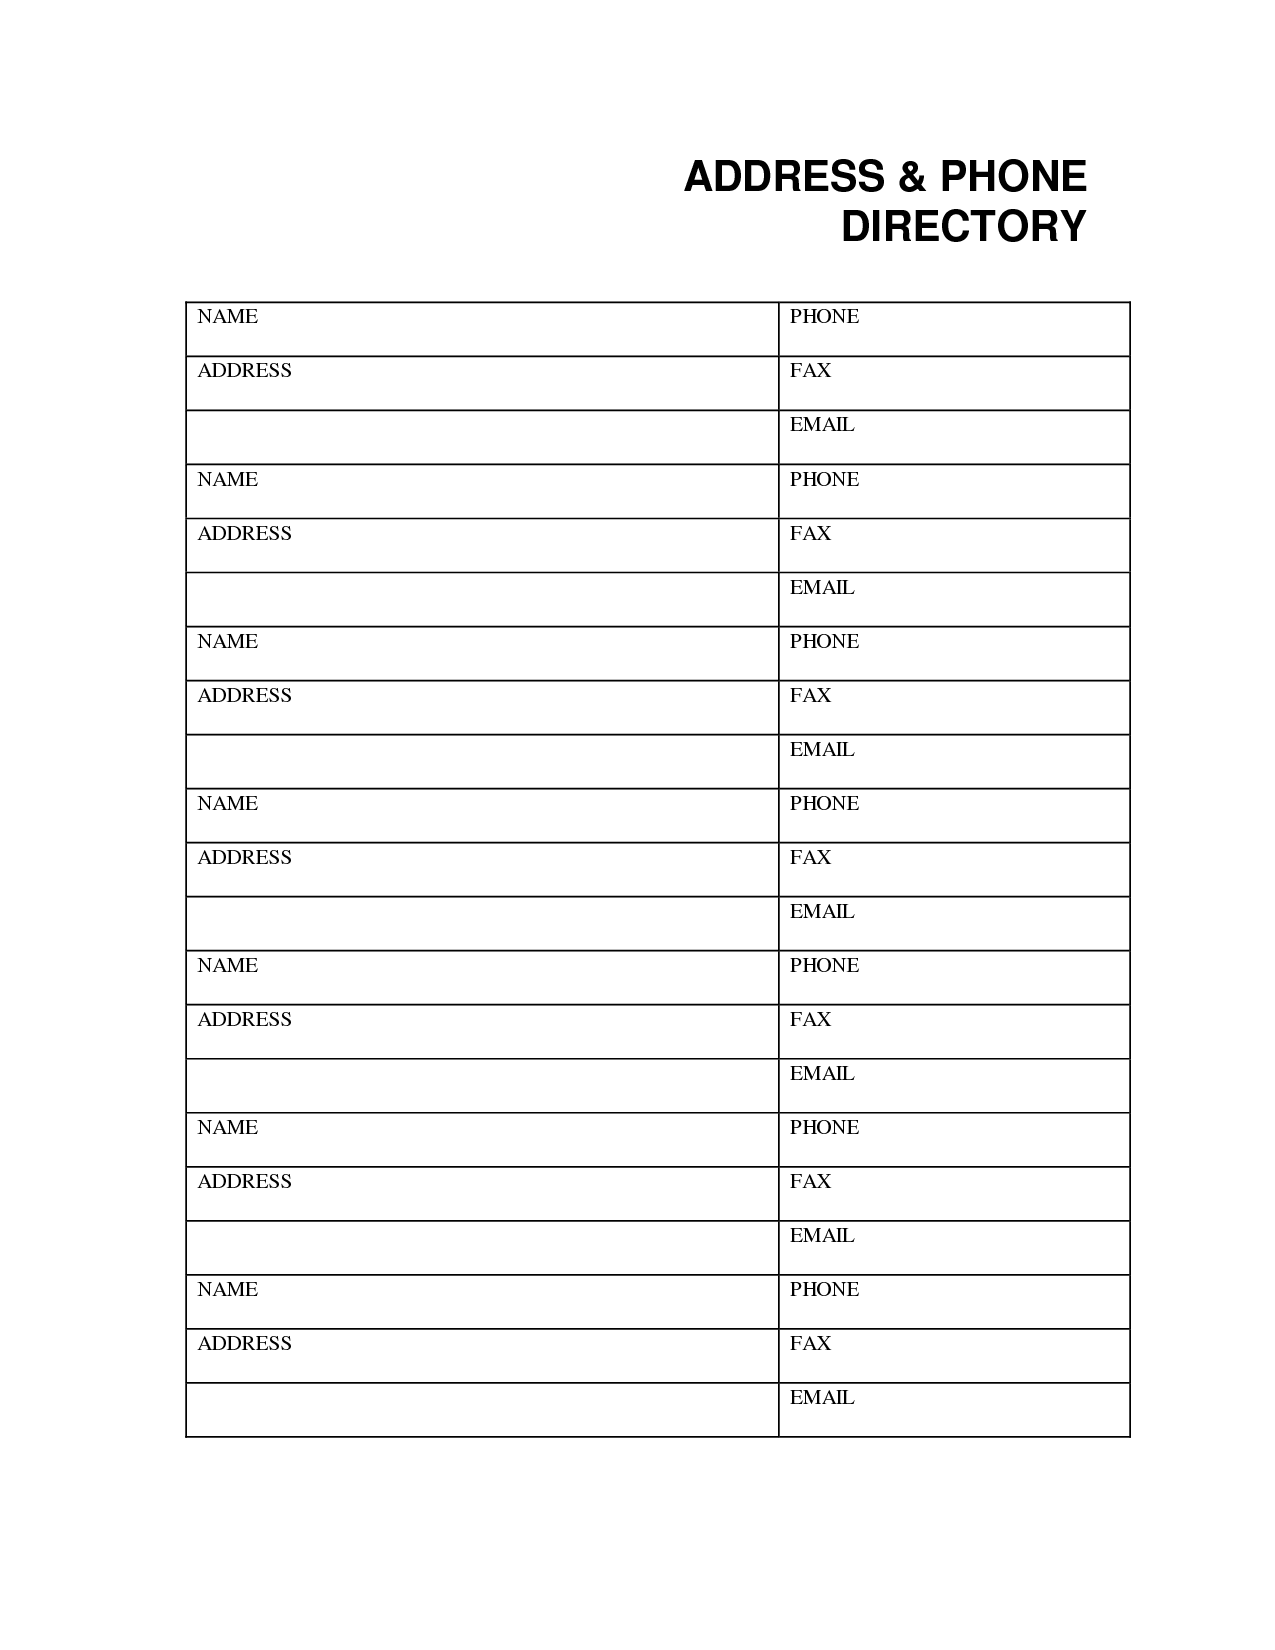 7-best-images-of-office-phone-list-template-printable-printable-phone